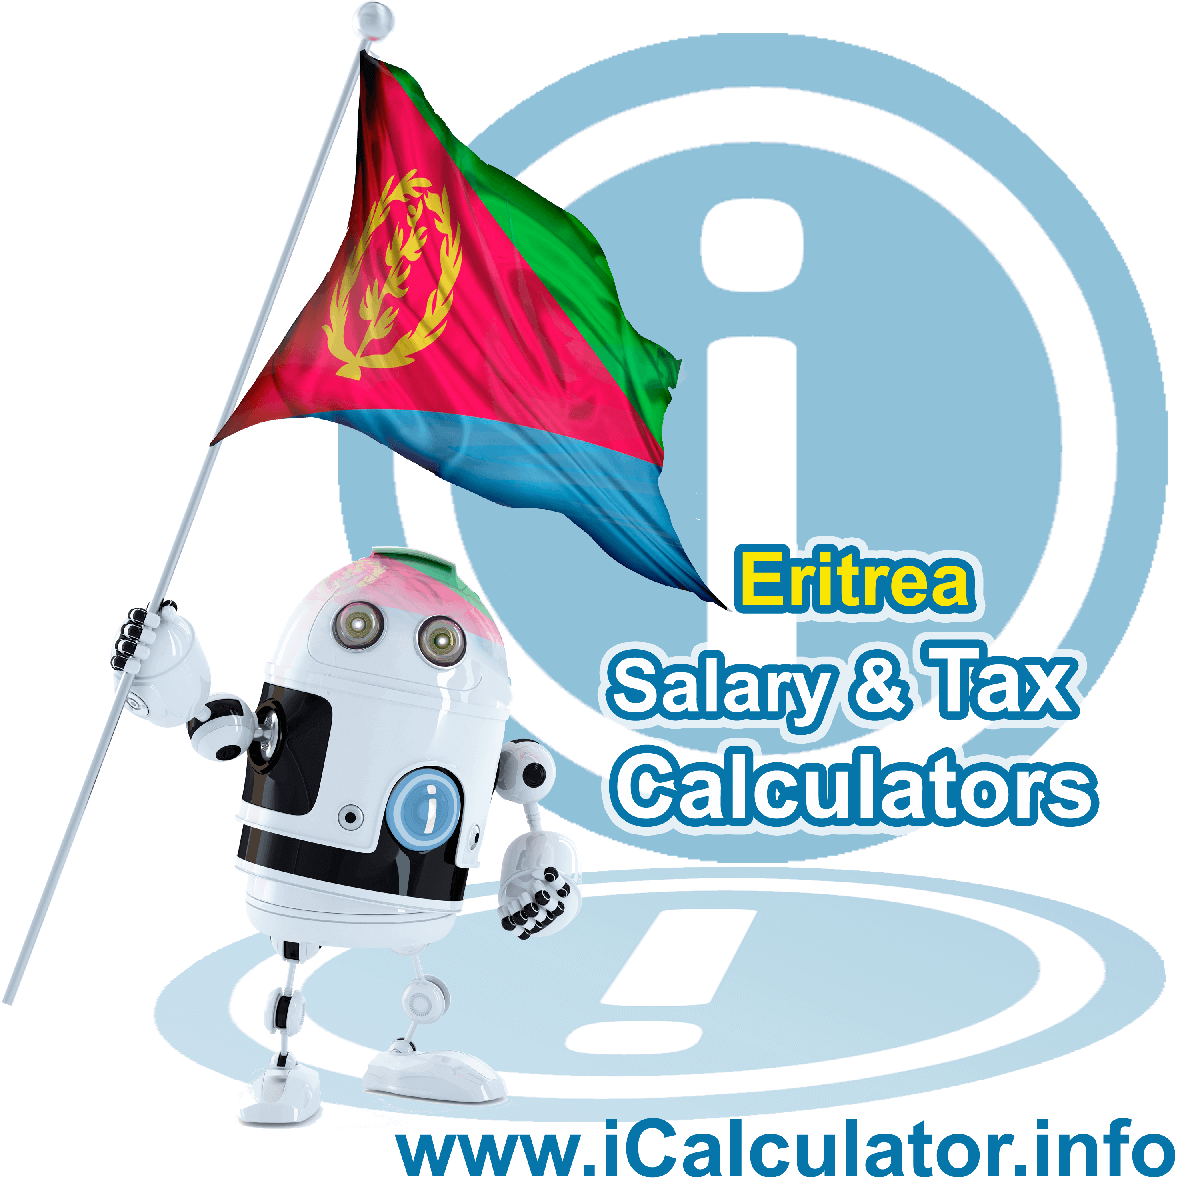 Eritrea Salary Calculator. This image shows the Eritreaese flag and information relating to the tax formula for the Eritrea Tax Calculator